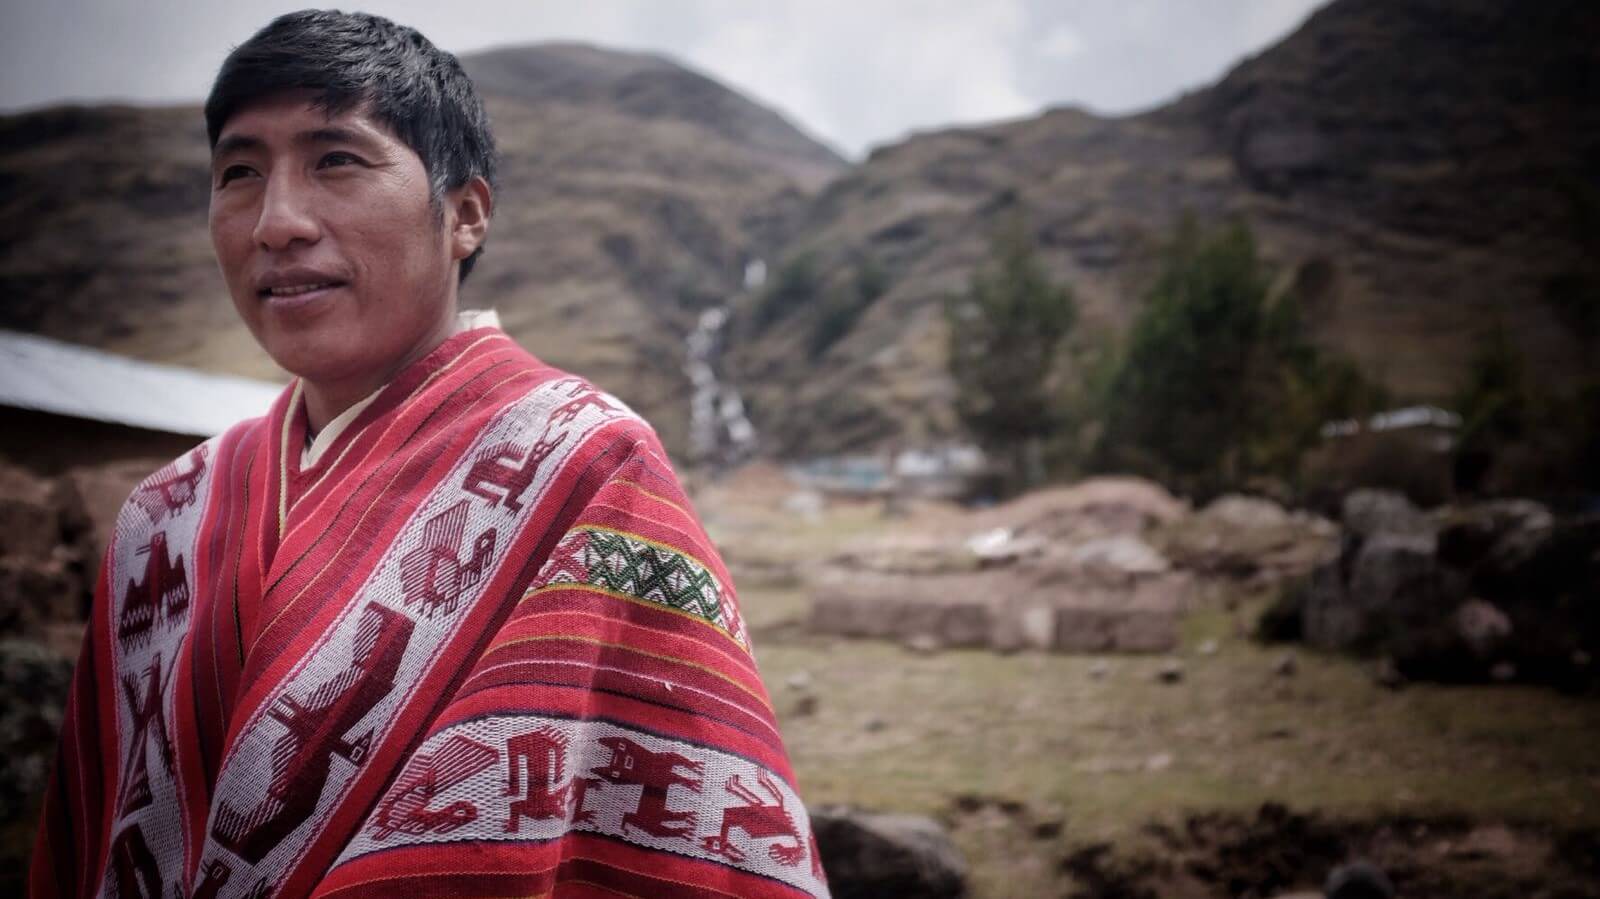 Octavio is one of our top guides. He was born in the small mountain community of Suttoc Pacchac, next to Huacahuasi where he is depicted here, wearing a traditional poncho made by his family. | RESPONSible Travel Peru